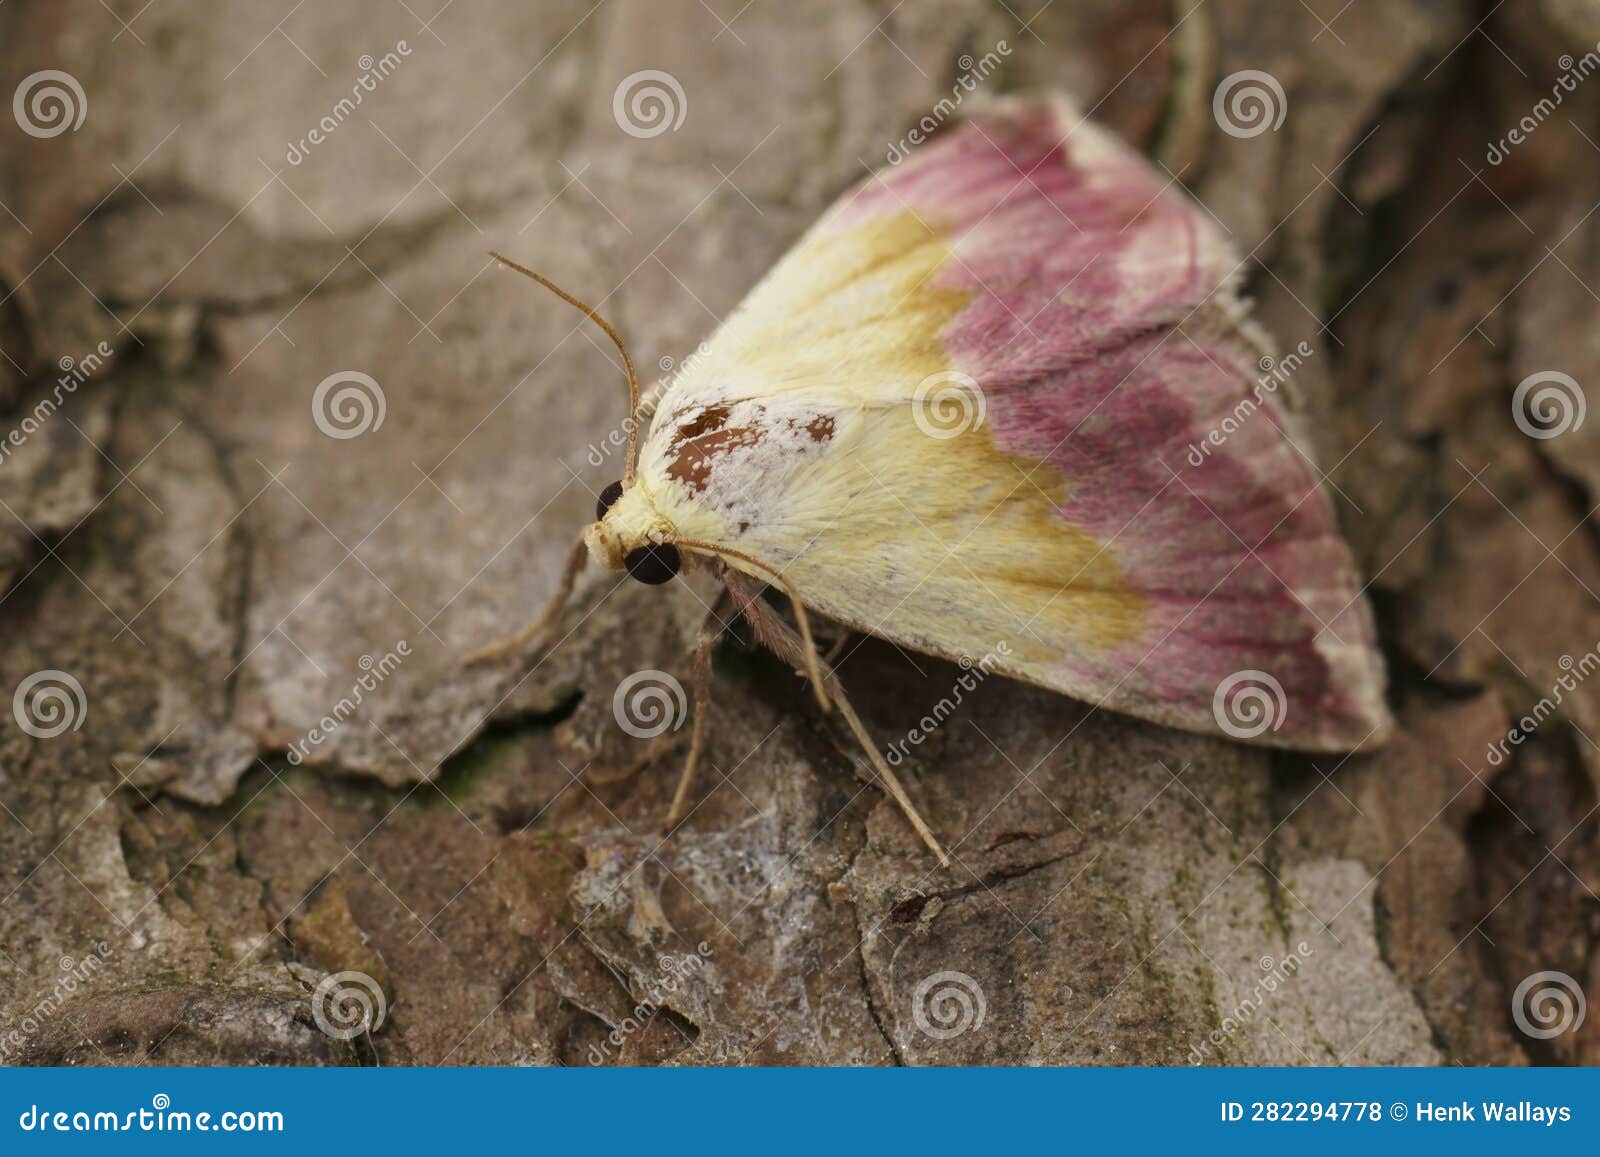 closeup on a colorful pink colored beautiful marbled moth, eublemma purpurina sitting on wood